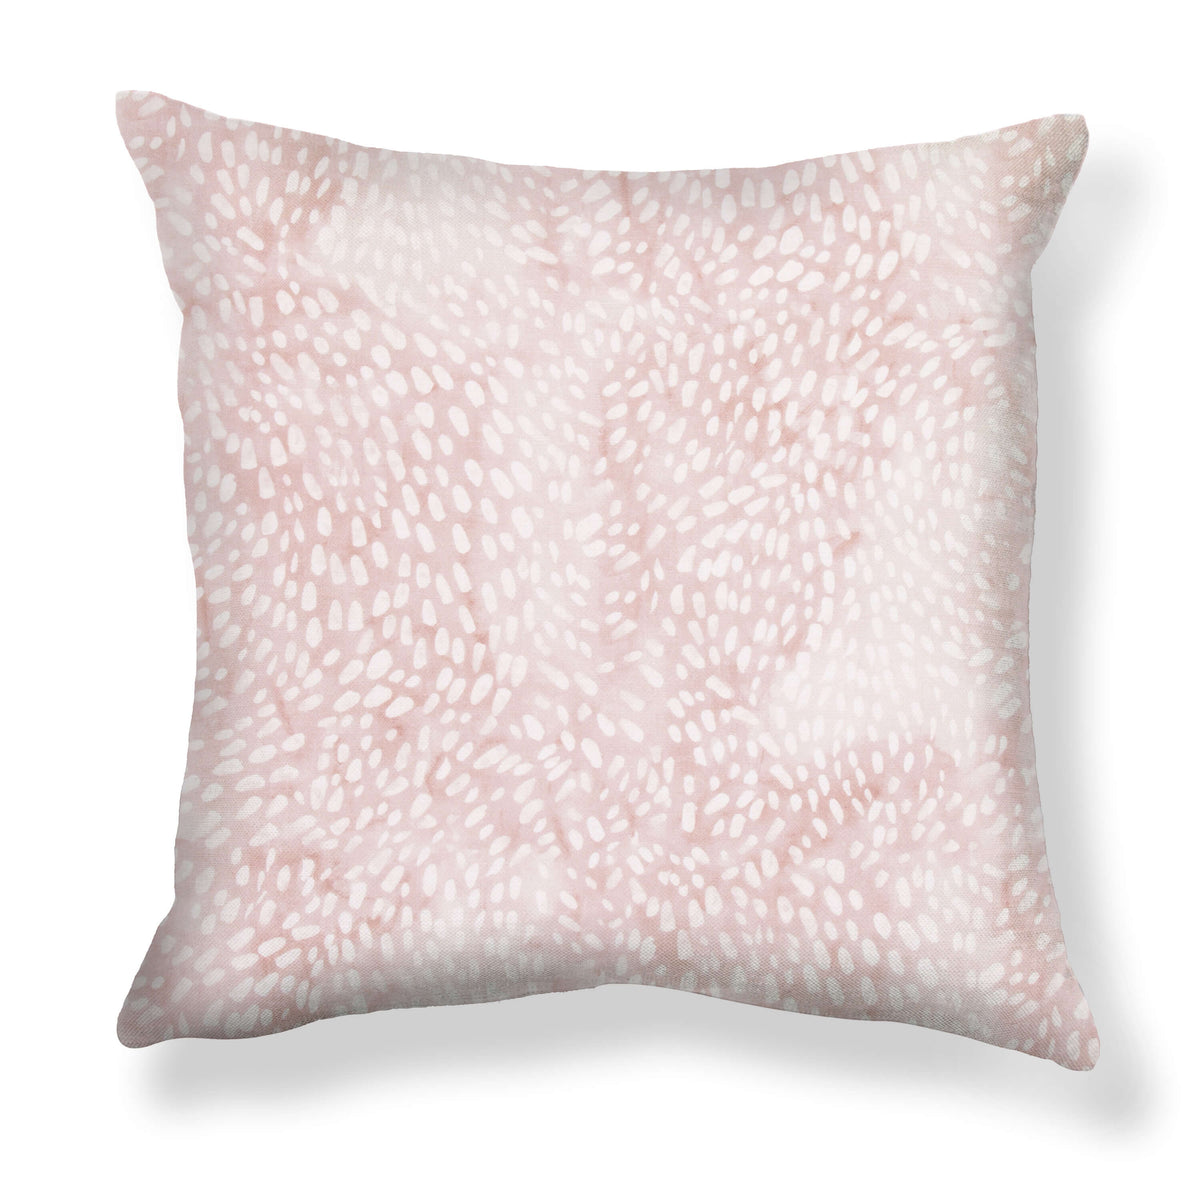 Speckled Pillow in Blush